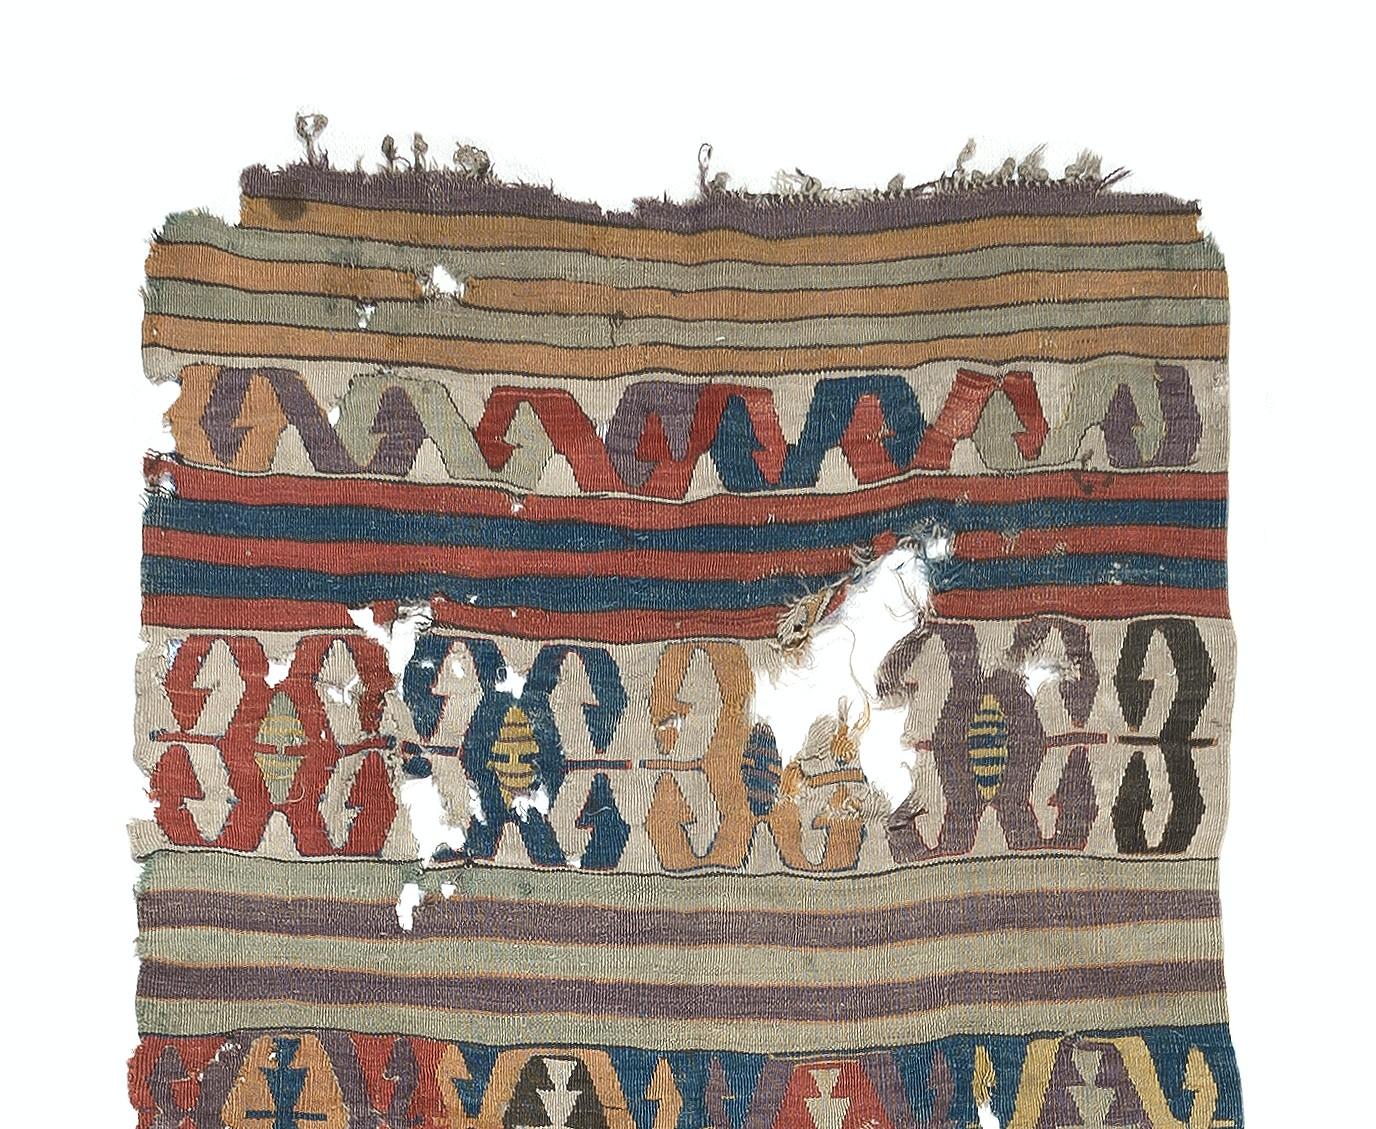 Embark on a journey through time and tradition with this exquisite Antique Anatolian Karapinar fragment distressed kilim, a rare artifact dating back to the 18th century. Crafted with meticulous skill and artistry by Anatolian weavers over three